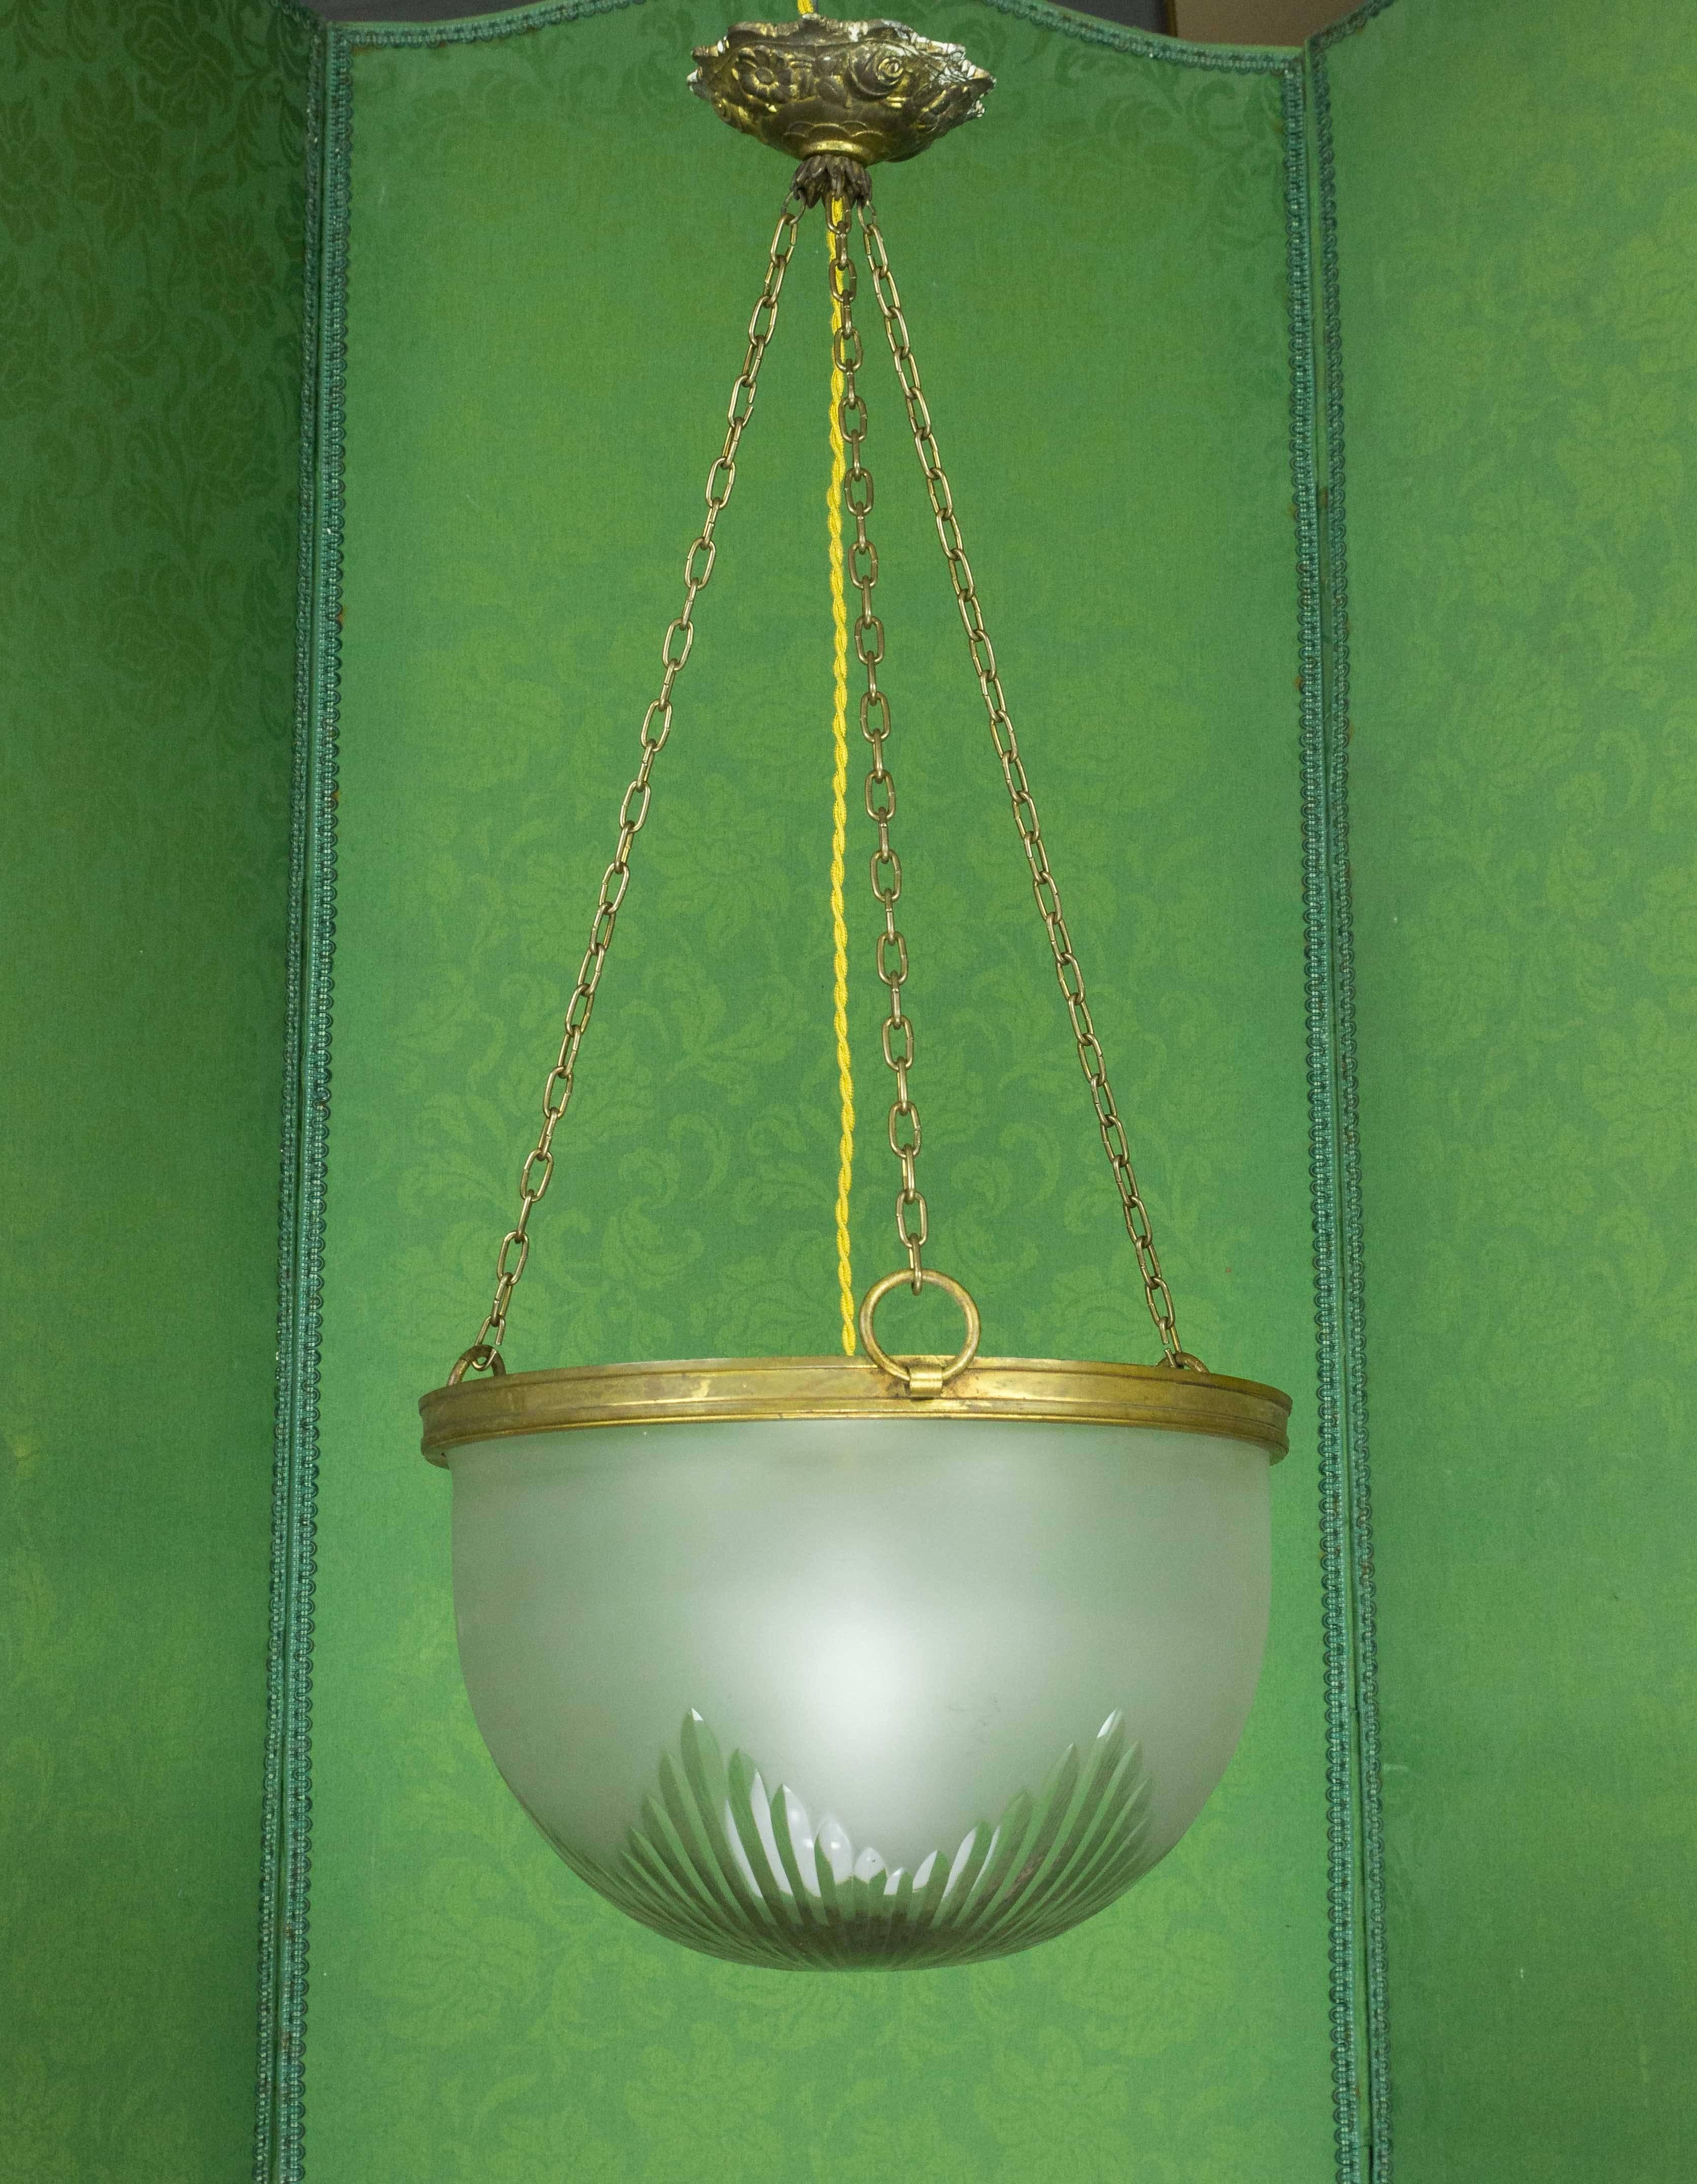 An unusual French light fixture, the cut-glass and frosted globe is suspended by three adjustable chains, circa 1920s.